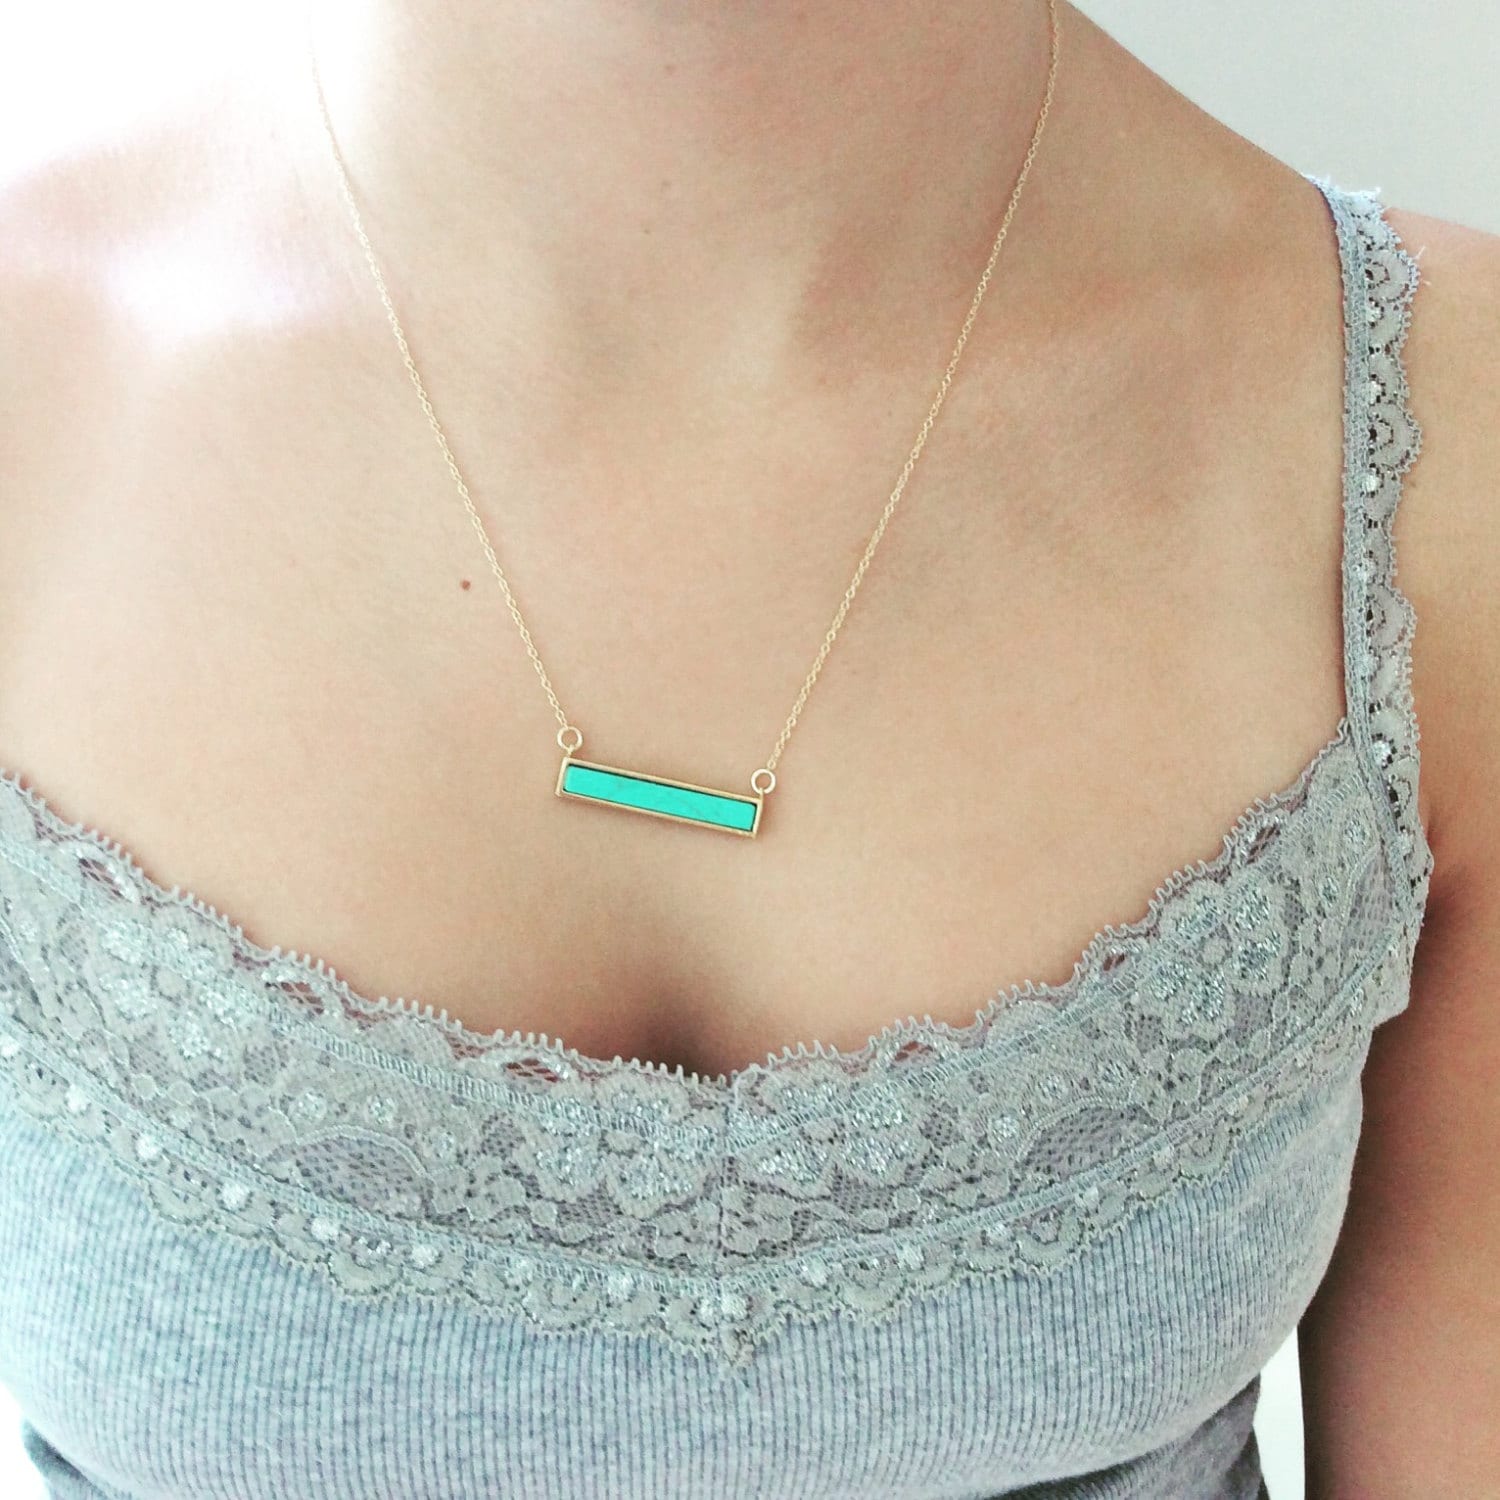 Turquoise Bar Necklace, Gold Bar Necklace, Gold Necklace, Dainty Gold Necklace Best Friend Gift Birthday Gift Bridesmaid gift, Minimalist